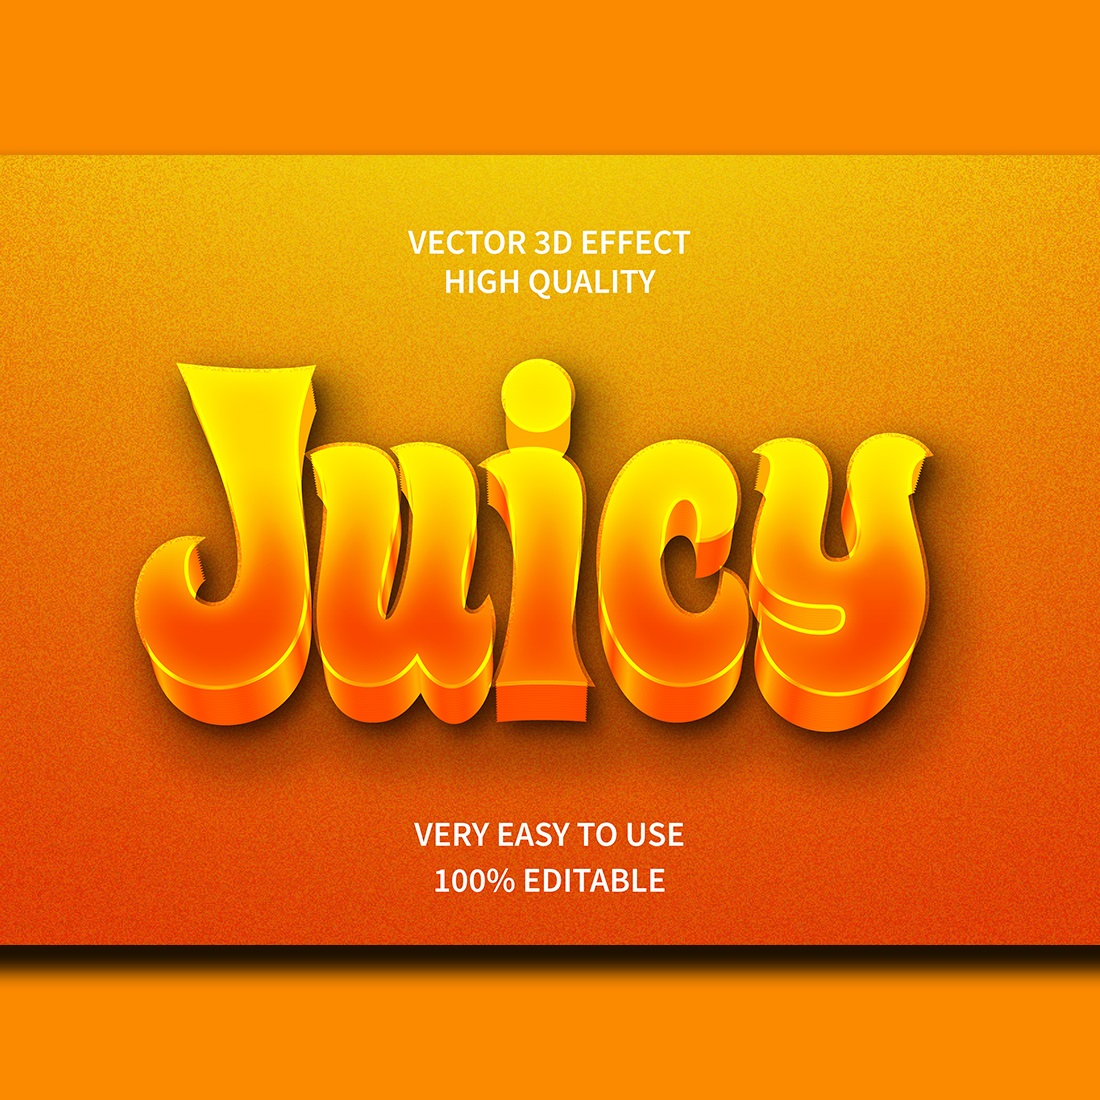 Juicy Editable 3D text Effect Vector preview image.